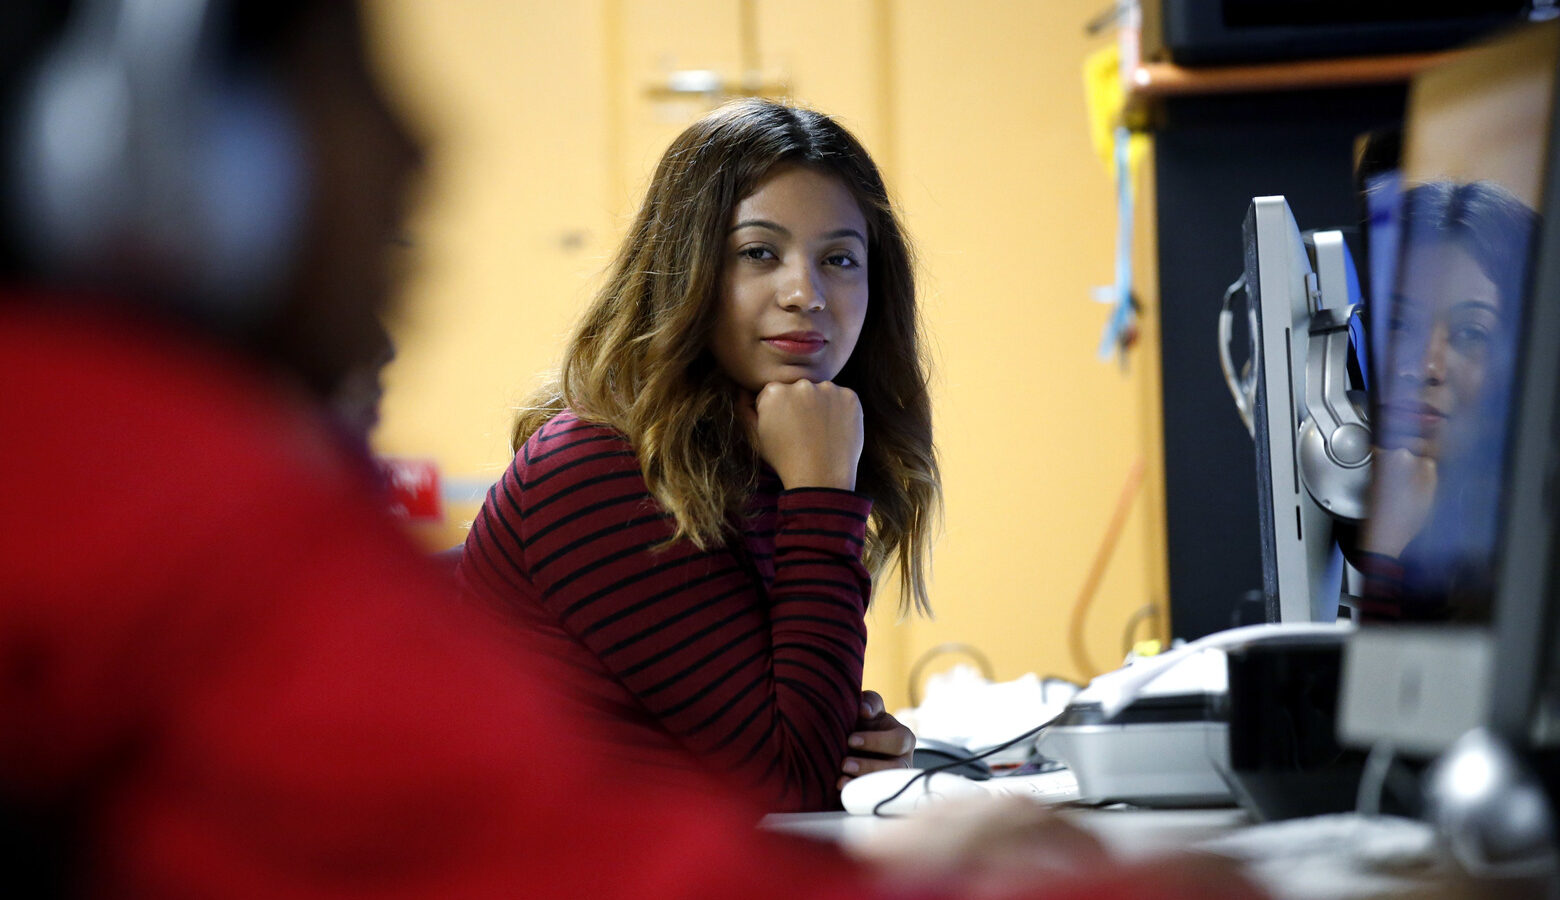 Andrea Aguilera sits at the Erie Neighborhood House in Chicago, Thursday, Nov. 17, 2016. Aguilera, 20, a student at a suburban Chicago college, said she feels uncertain since the election. She was brought to the country illegally as a child and has been able to get a work permit and avoid deportation through a federal program called, Deferred Action for Childhood Arrivals. She said she doesn't know what will happen next with the program. (AP Photo/Nam Y. Huh)